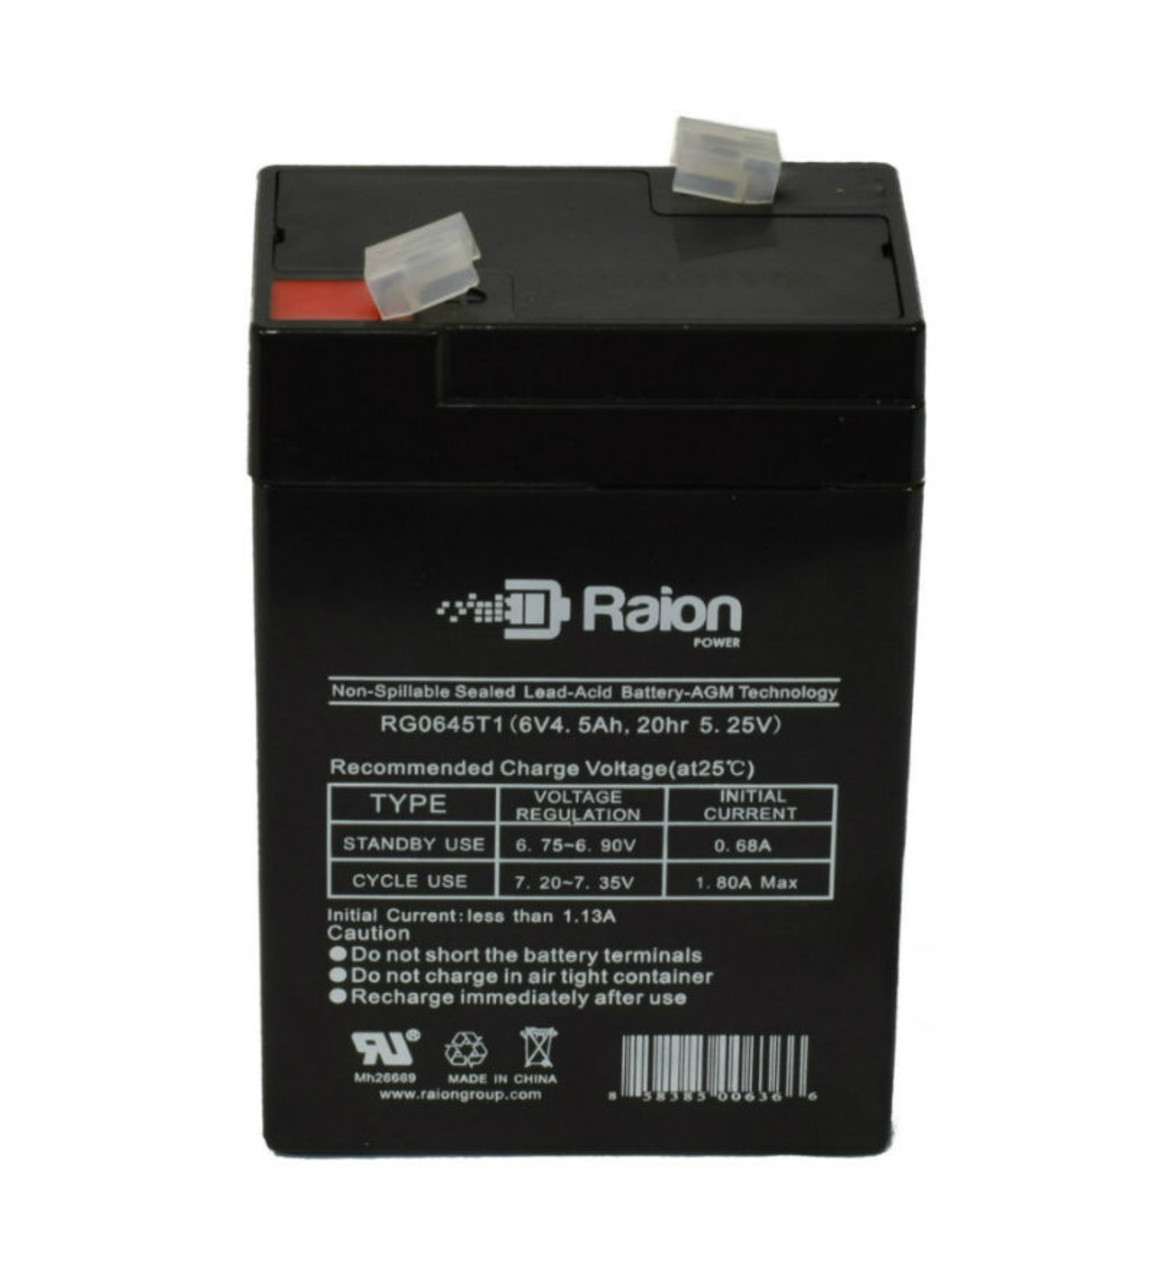 Raion Power RG0645T1 Replacement Battery Cartridge for Expocell P206/45